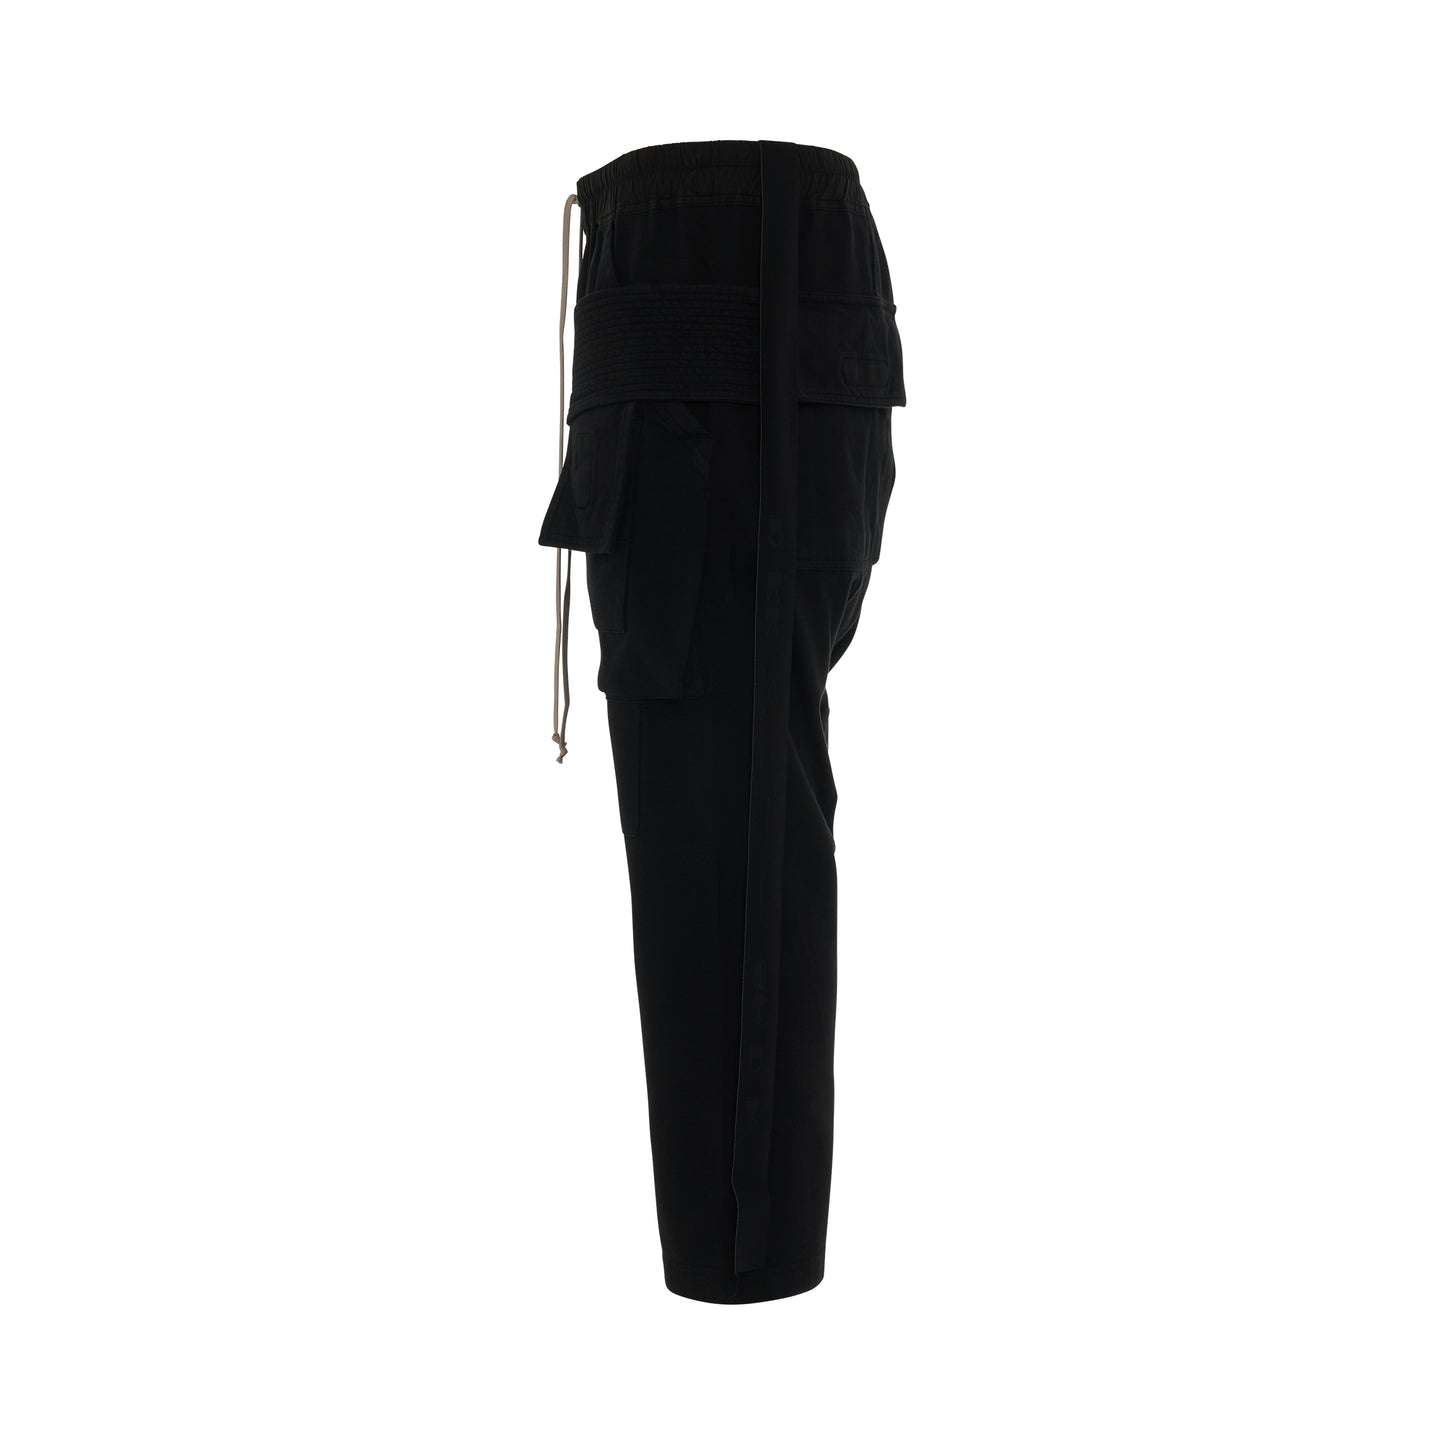 DRKSHDW Creatch Cargo Cropped Drawstring Pants in Black